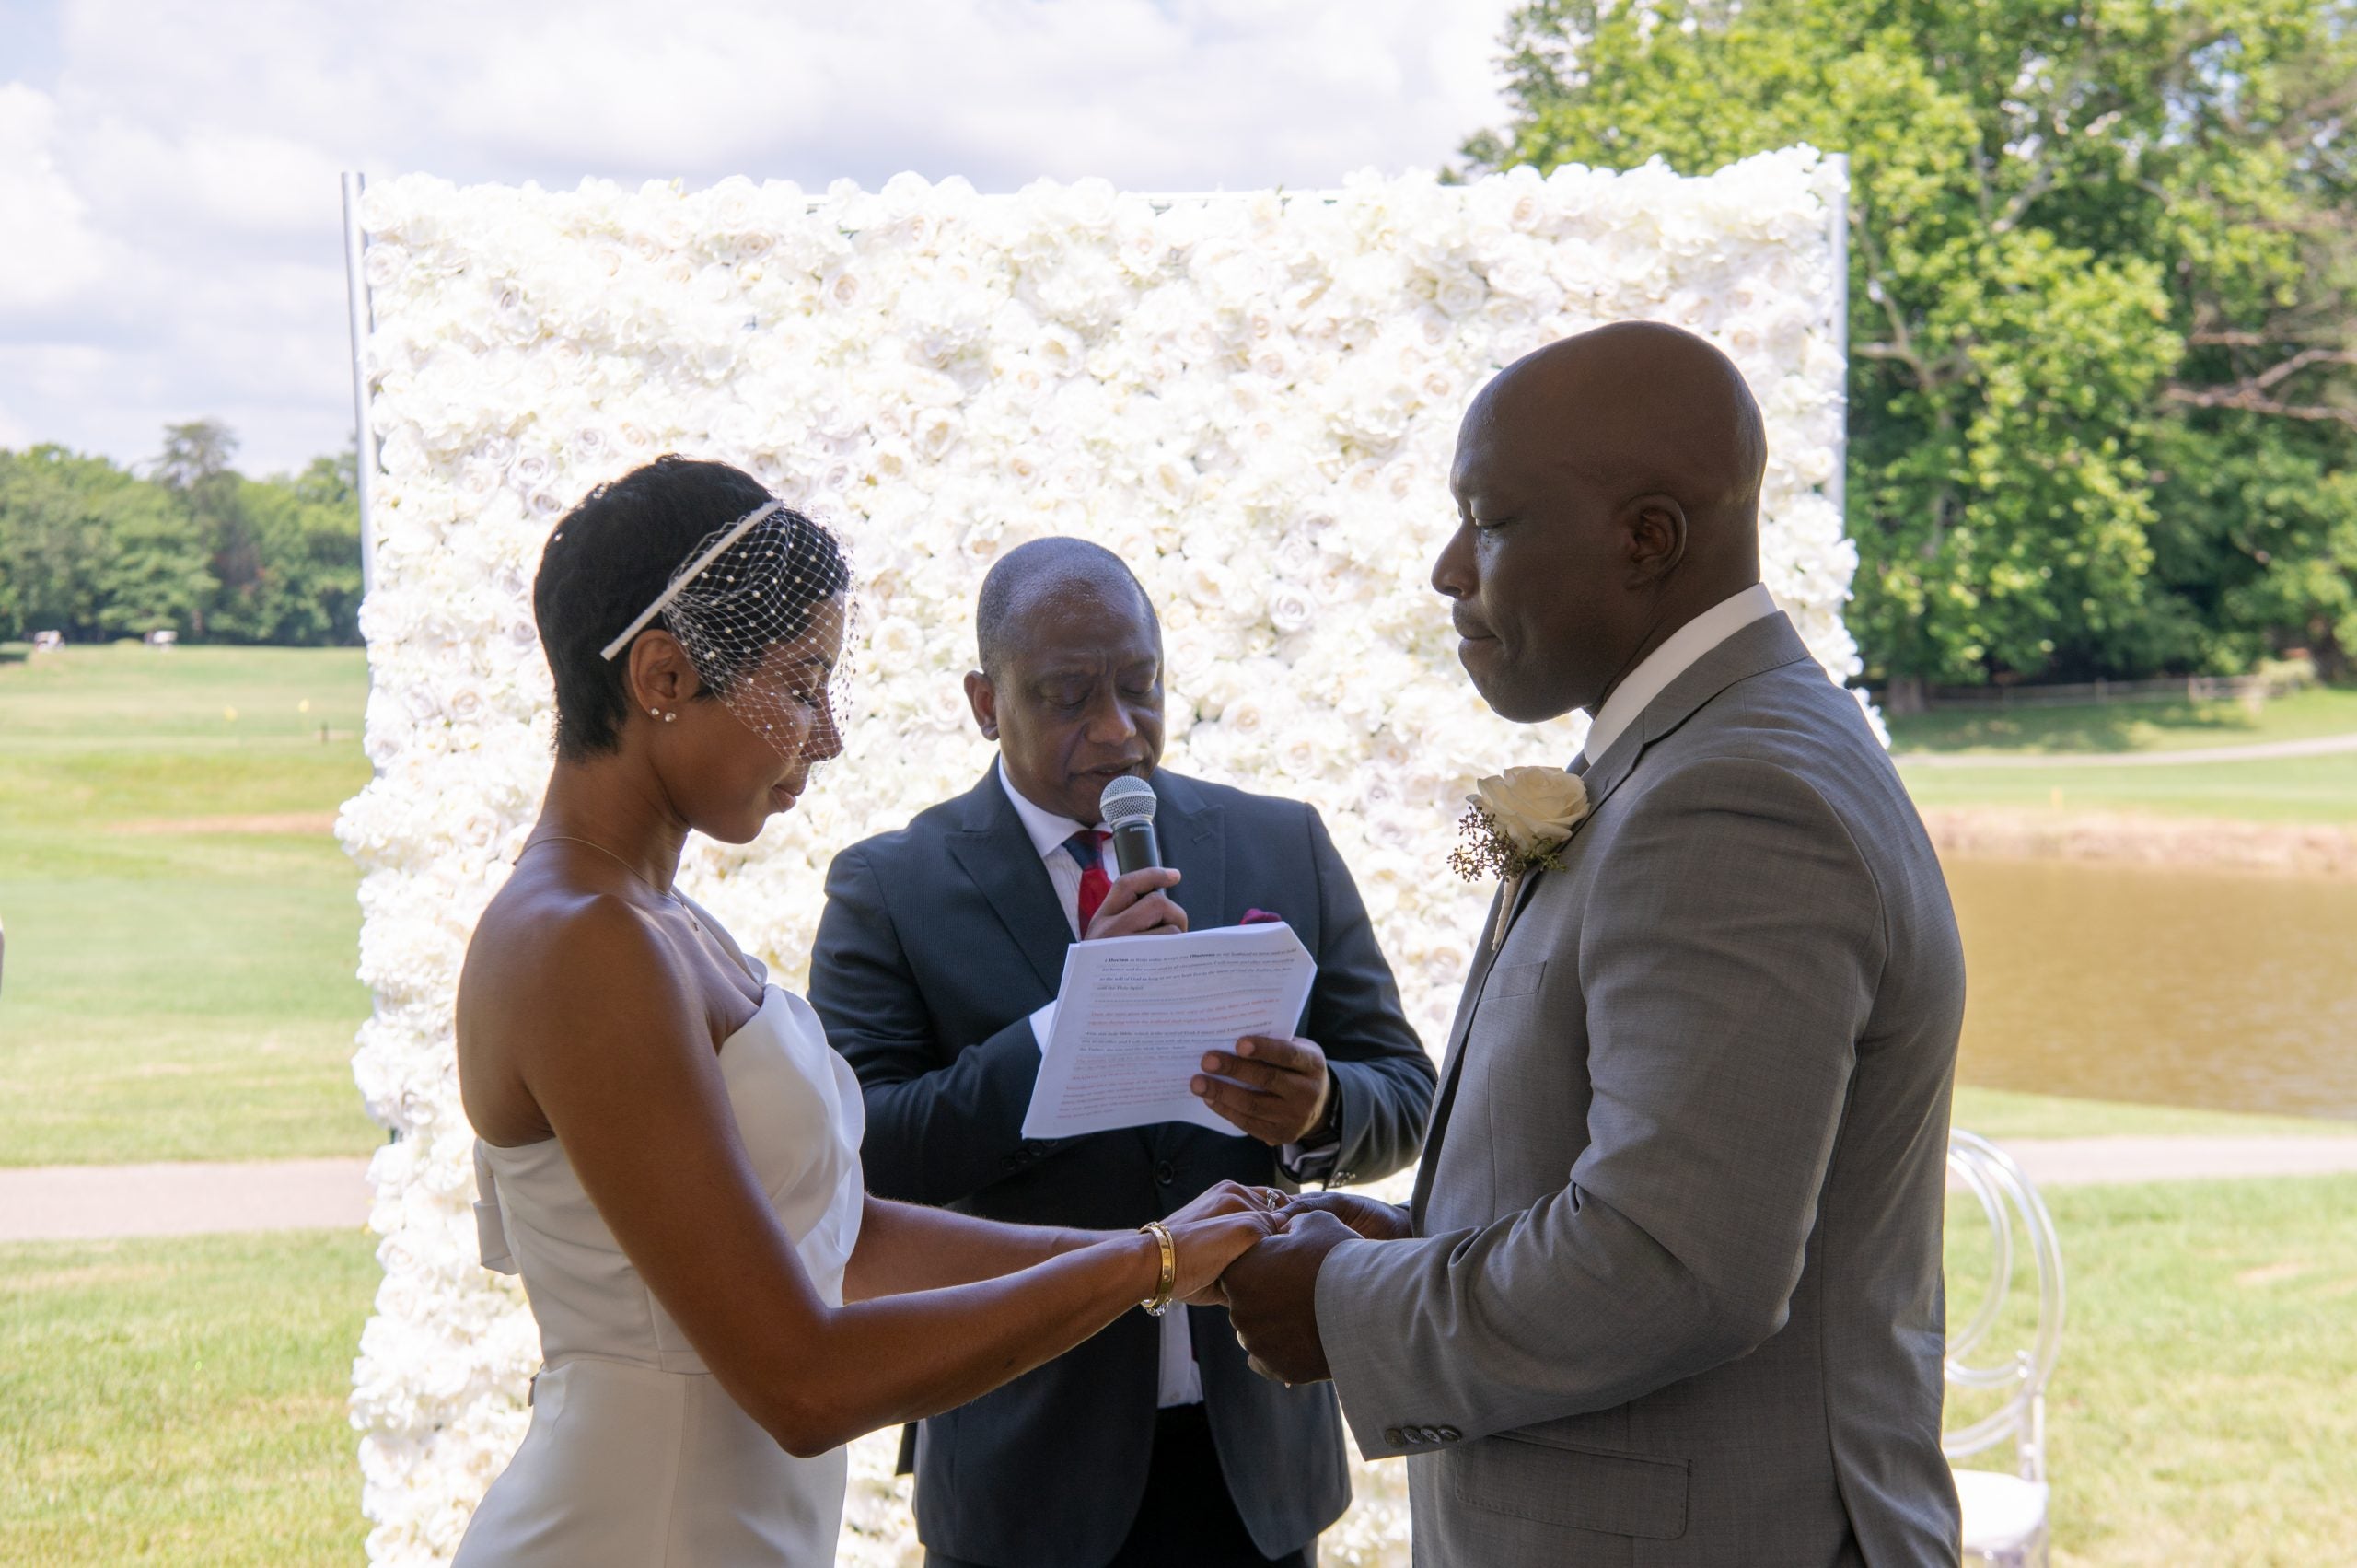 Bridal Bliss: Dorian And Oludotun Won With This Stylish Golf Course Wedding